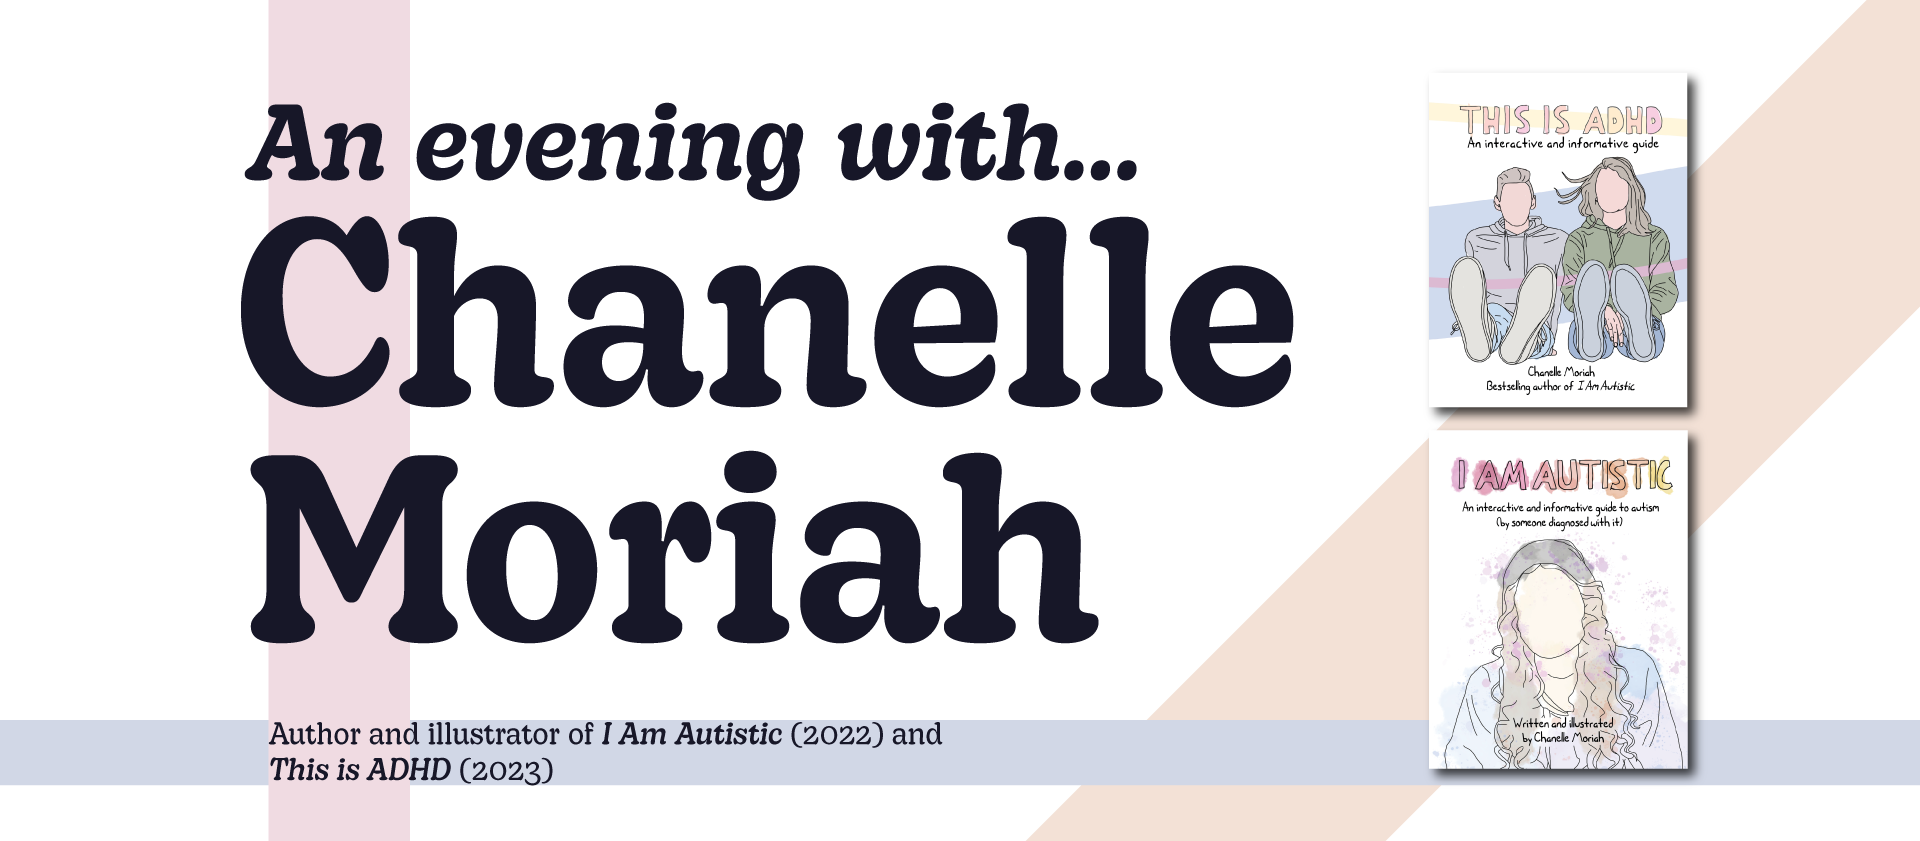 A graphic for an event, a mostly white background with stripes of light red, orange and blue. The graphic reads: "An evening with... Chancelle Moriah"